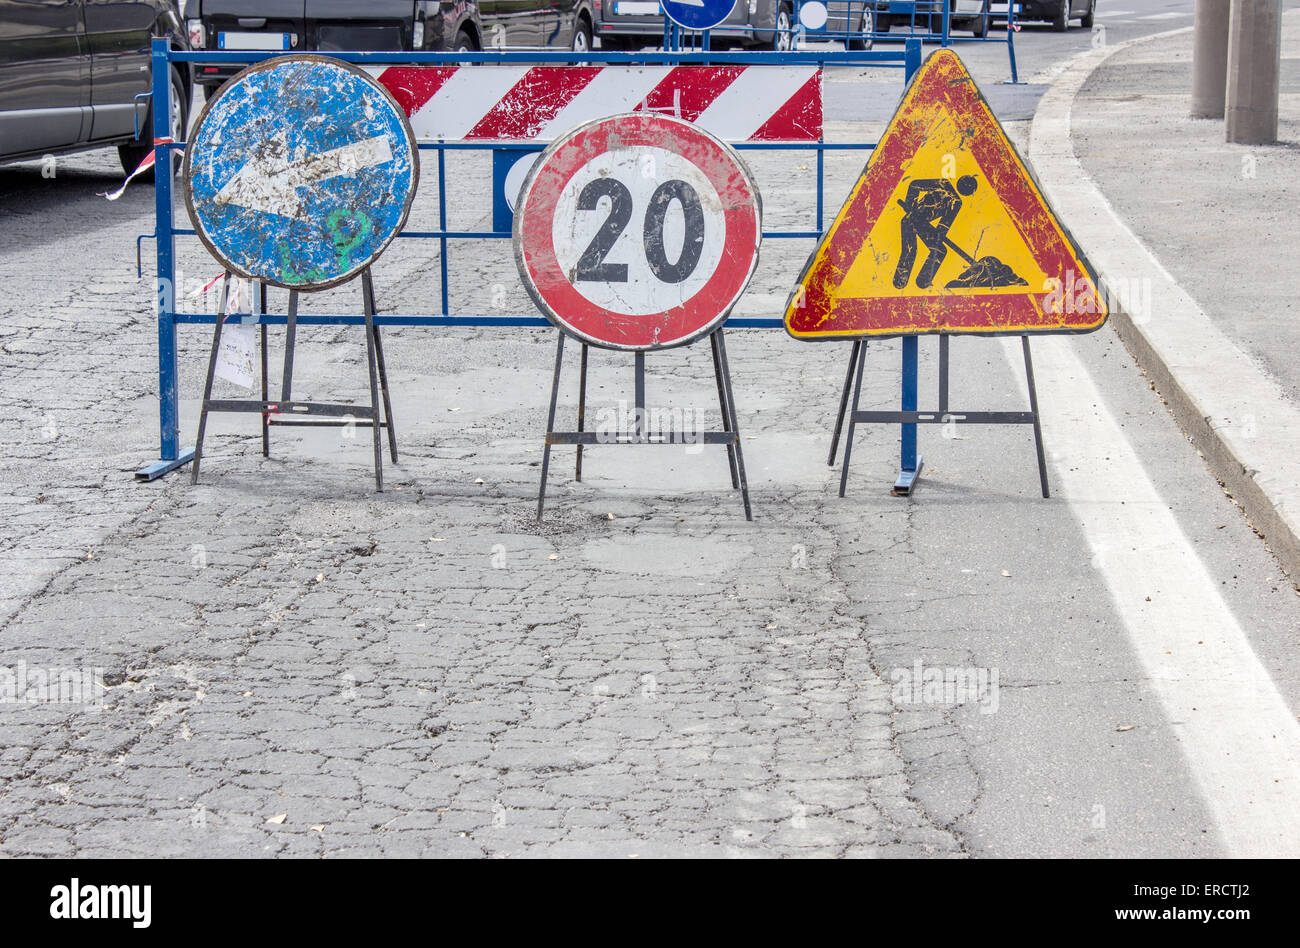 Road construction site with traffic signs Stock Photo